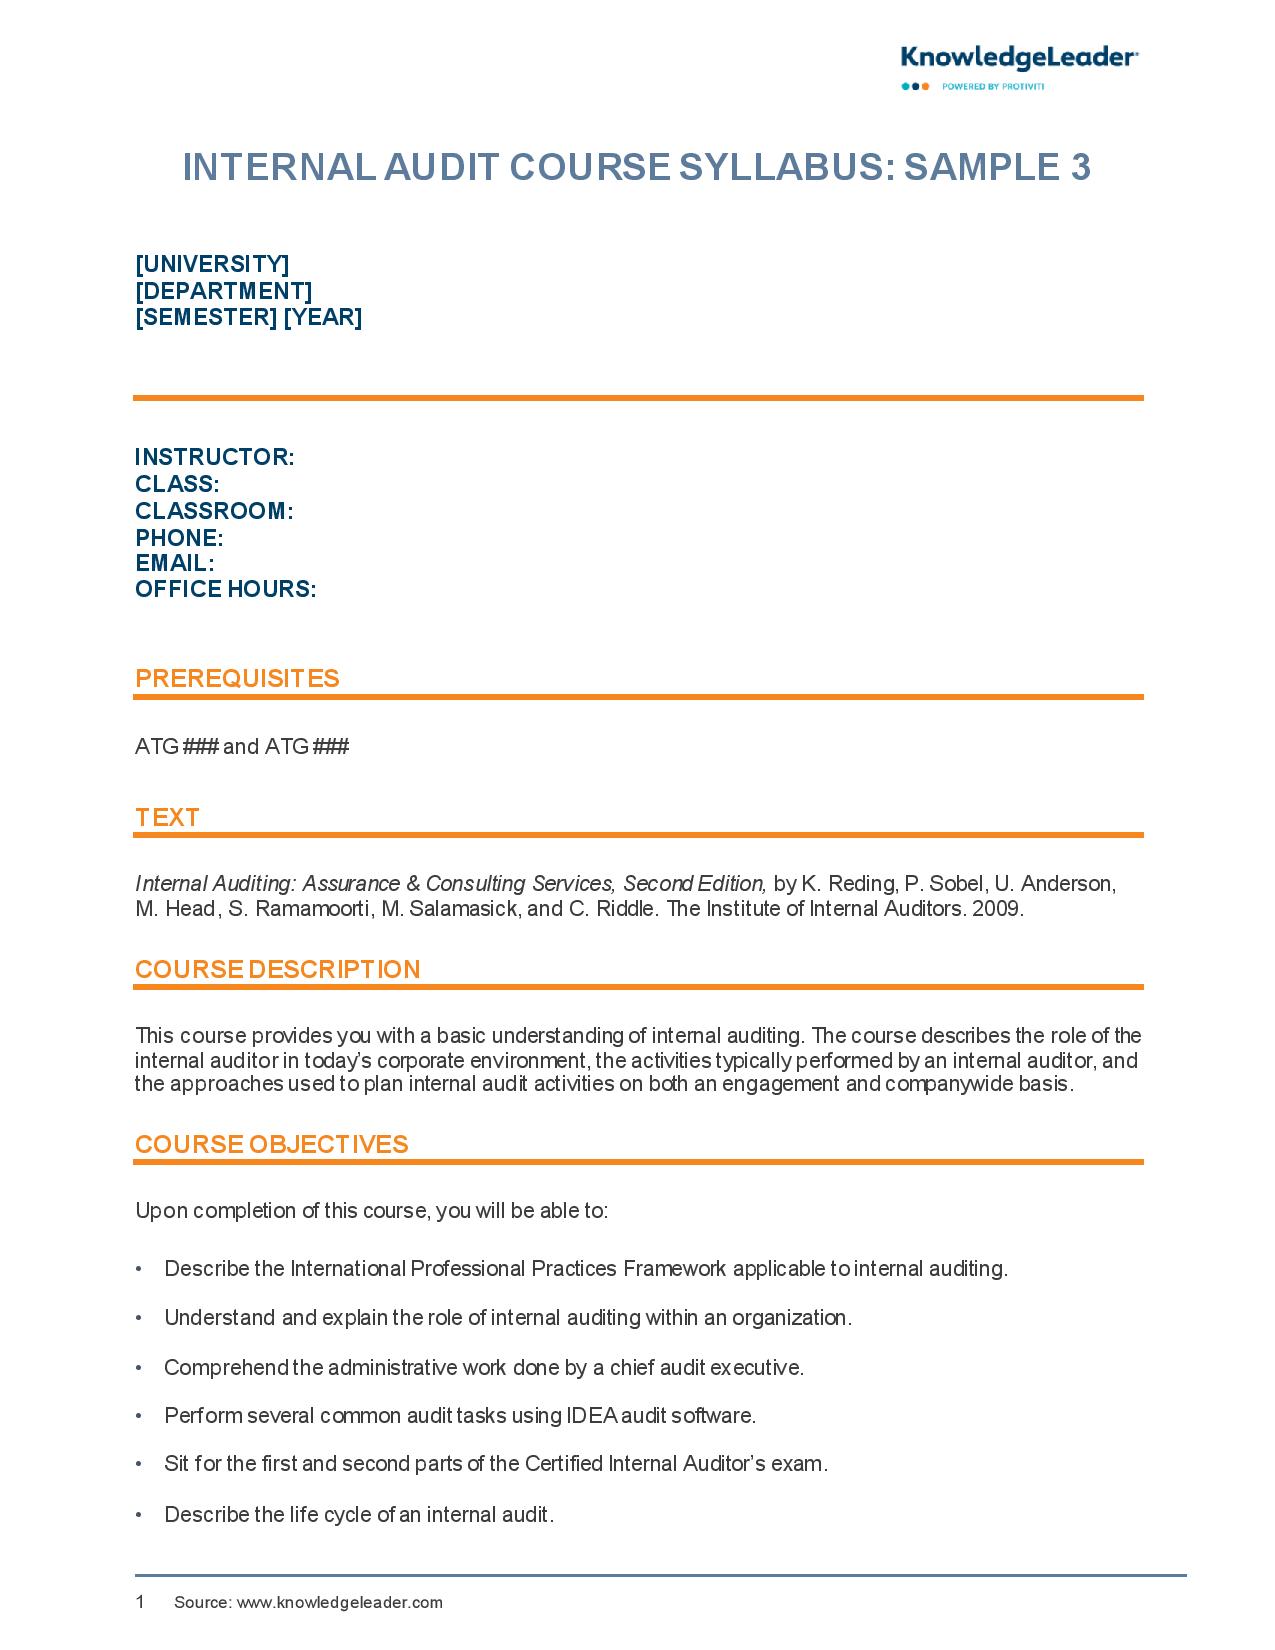 Screenshot of the first page of Internal Audit Course Syllabus Sample 3